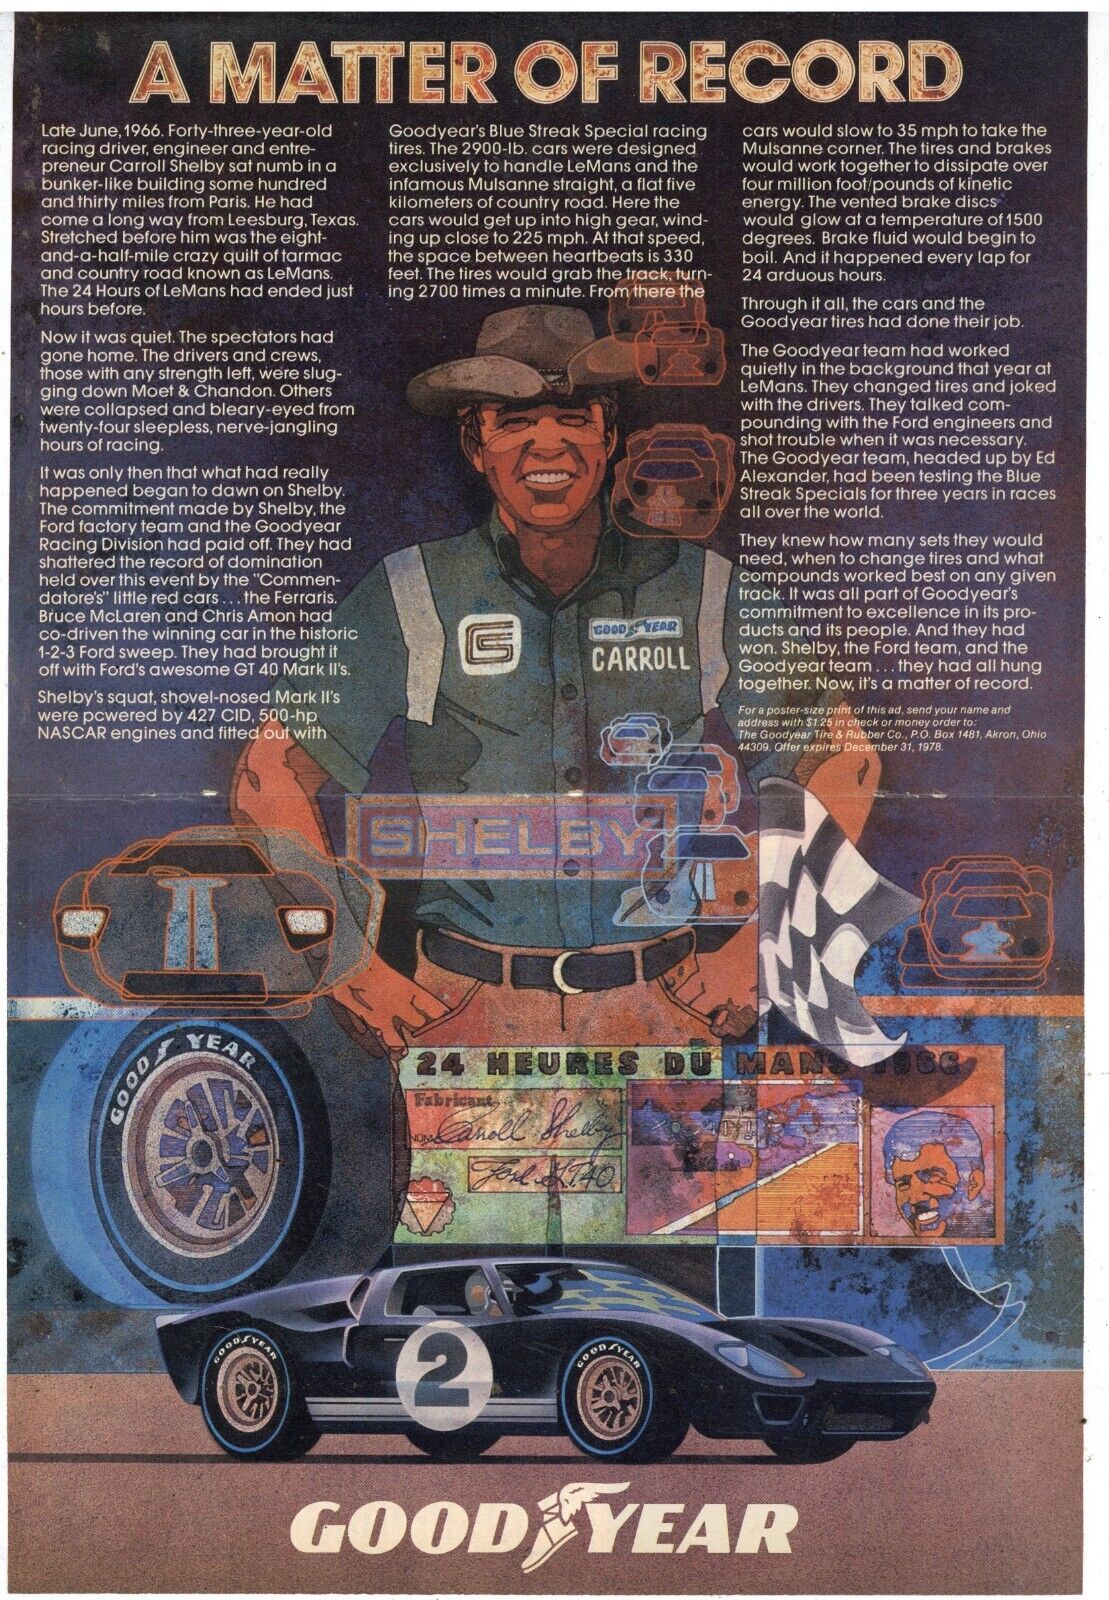 1978 Goodyear Tires True Centerfold Ad: Carroll Shelby & The Ford at LeMans Race